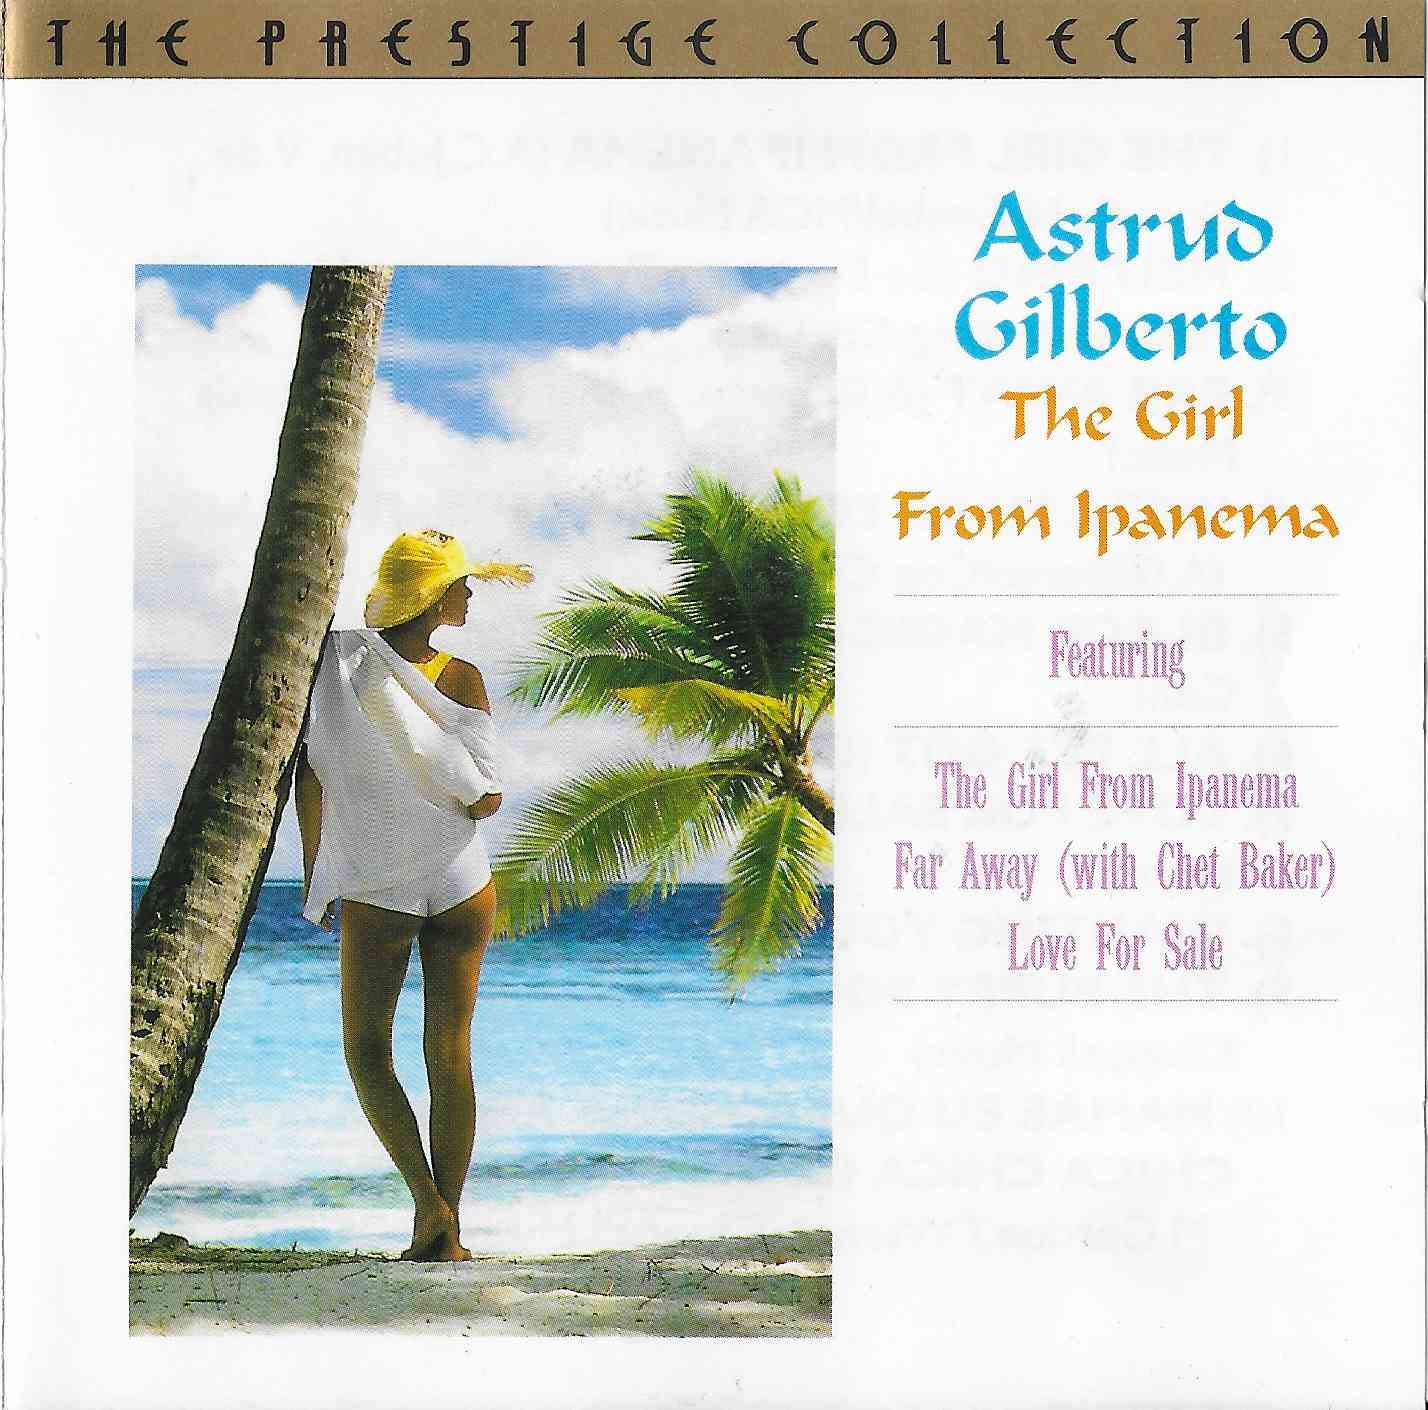 Picture of CDPC 5009 The girl from Ipanema by artist Astrud Gilberto